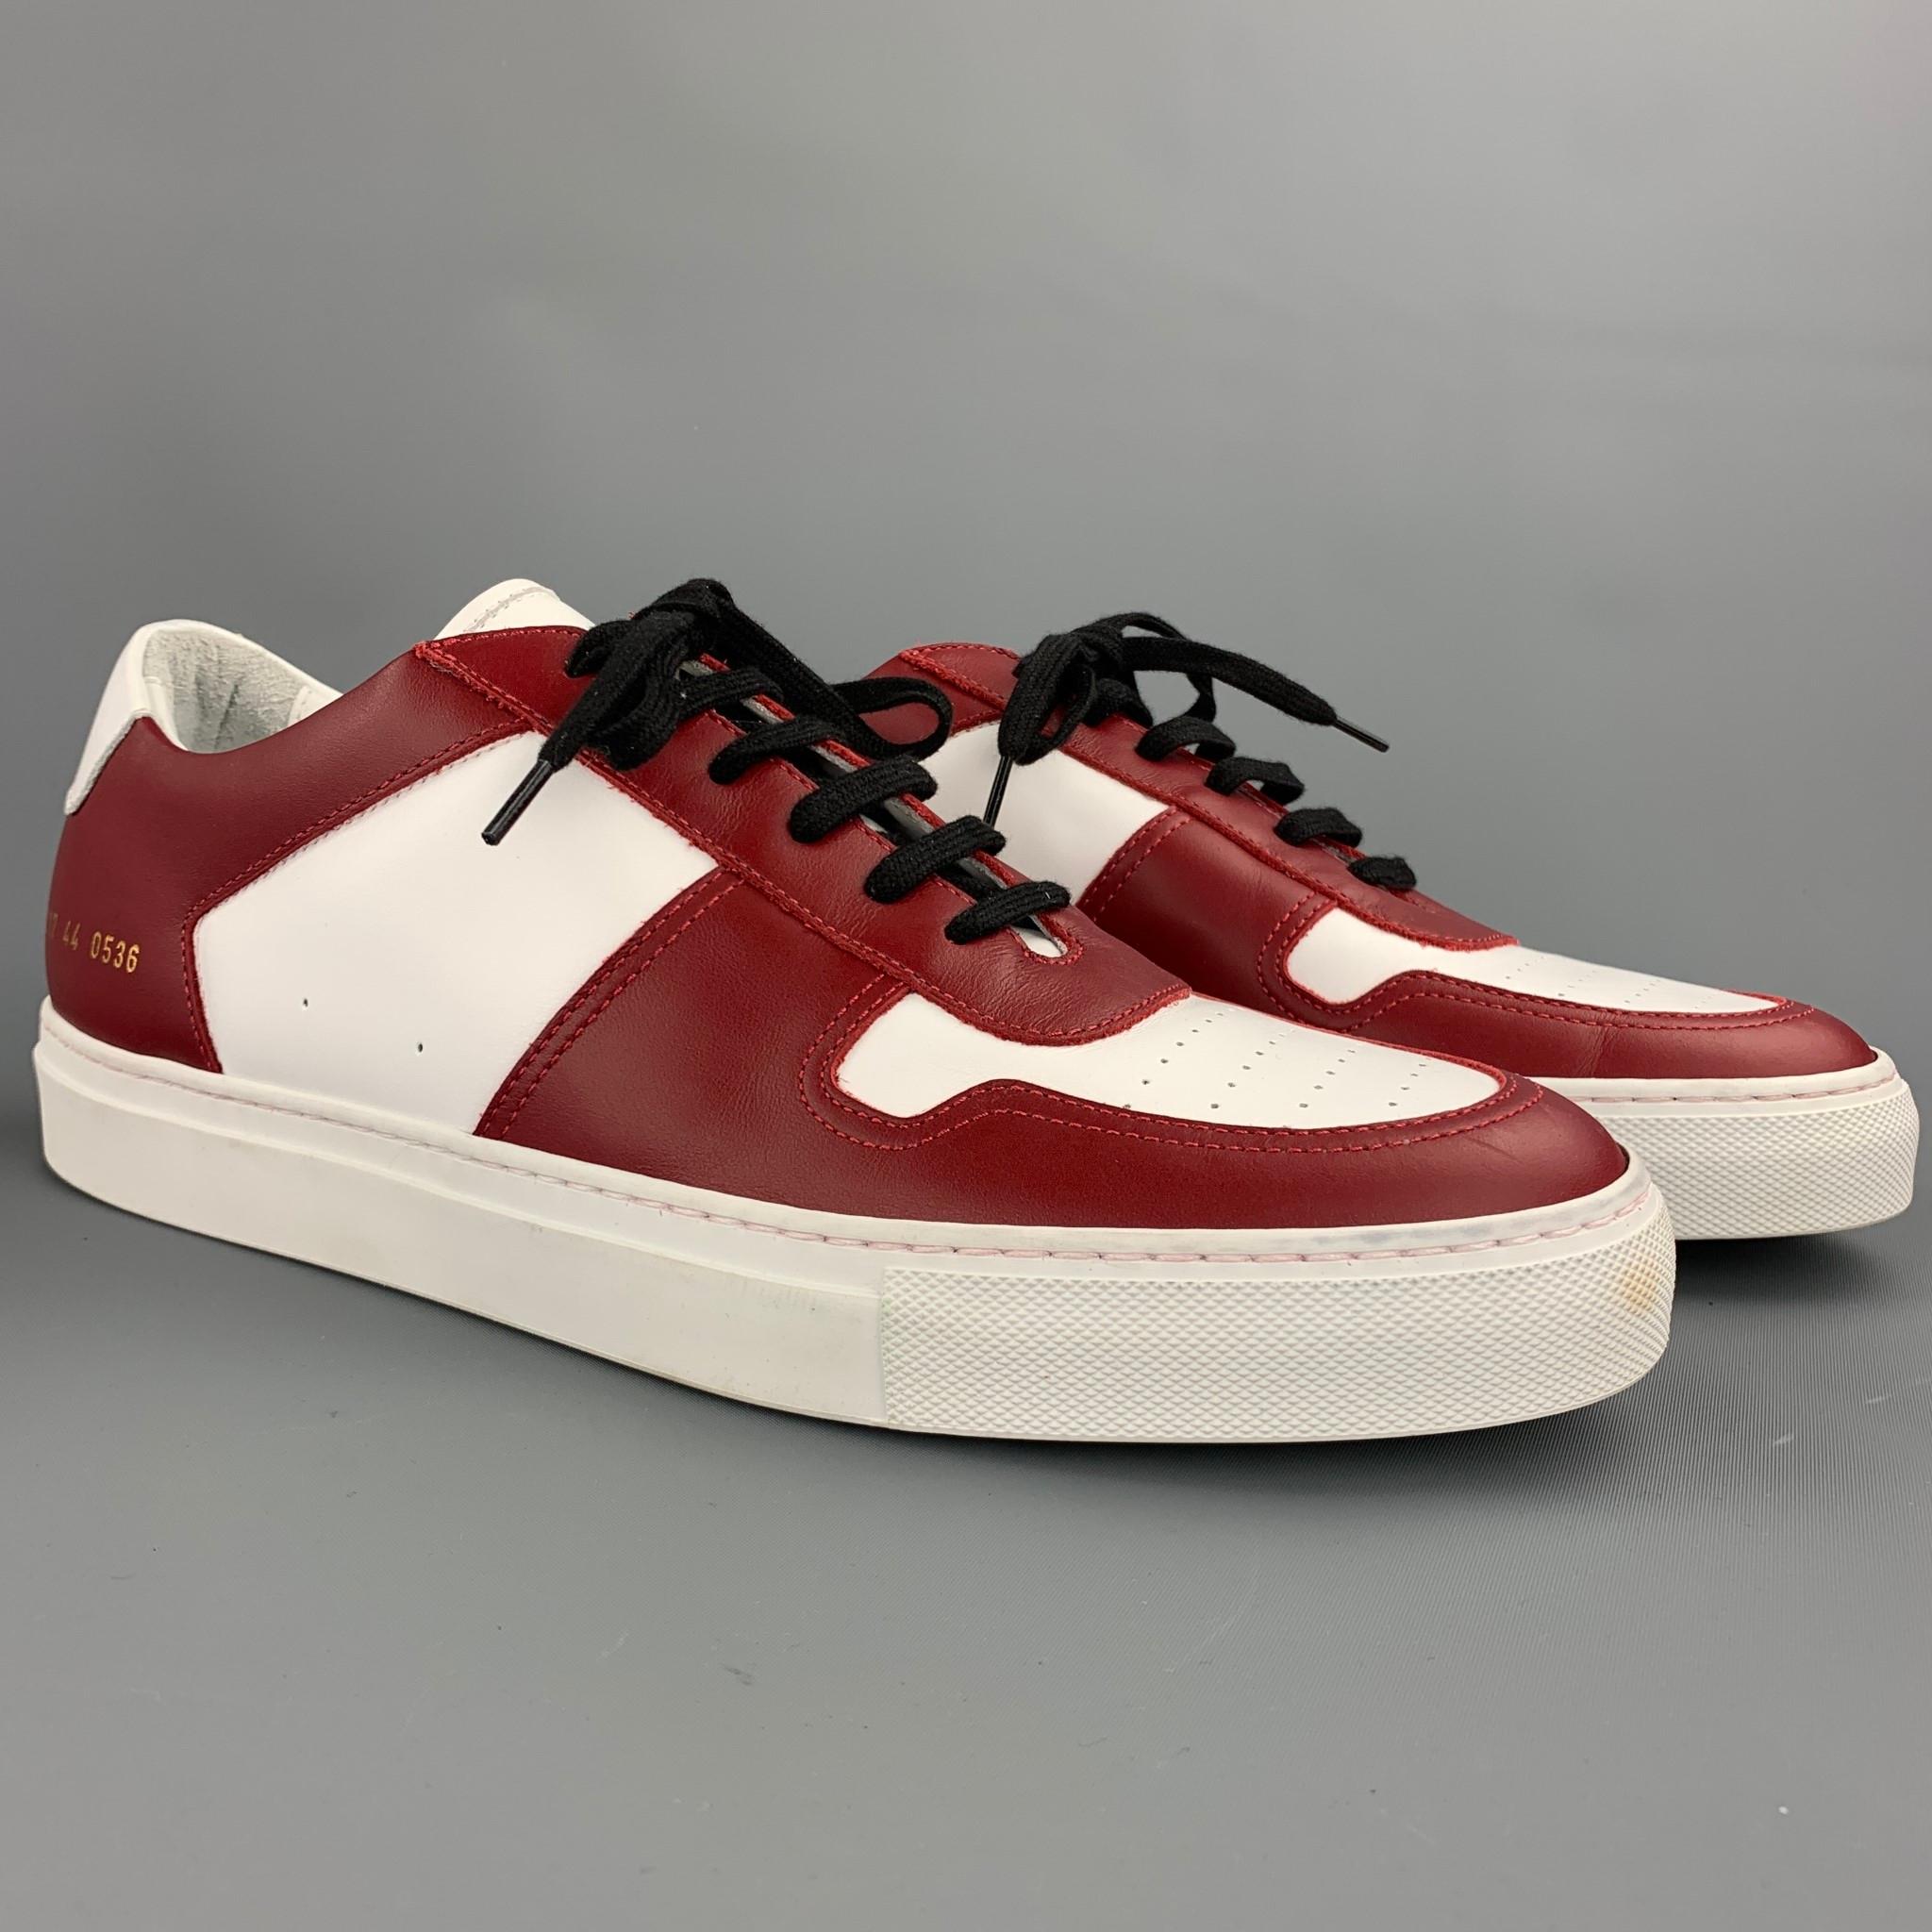 COMMON PROJECTS shoes comes in a white & burgundy leather featuring a rubber sole and a lace up closure. Made in Italy. 

Very Good Pre-Owned Condition.
Marked: EU 44

Outsole:

12 in. x 4 in. 